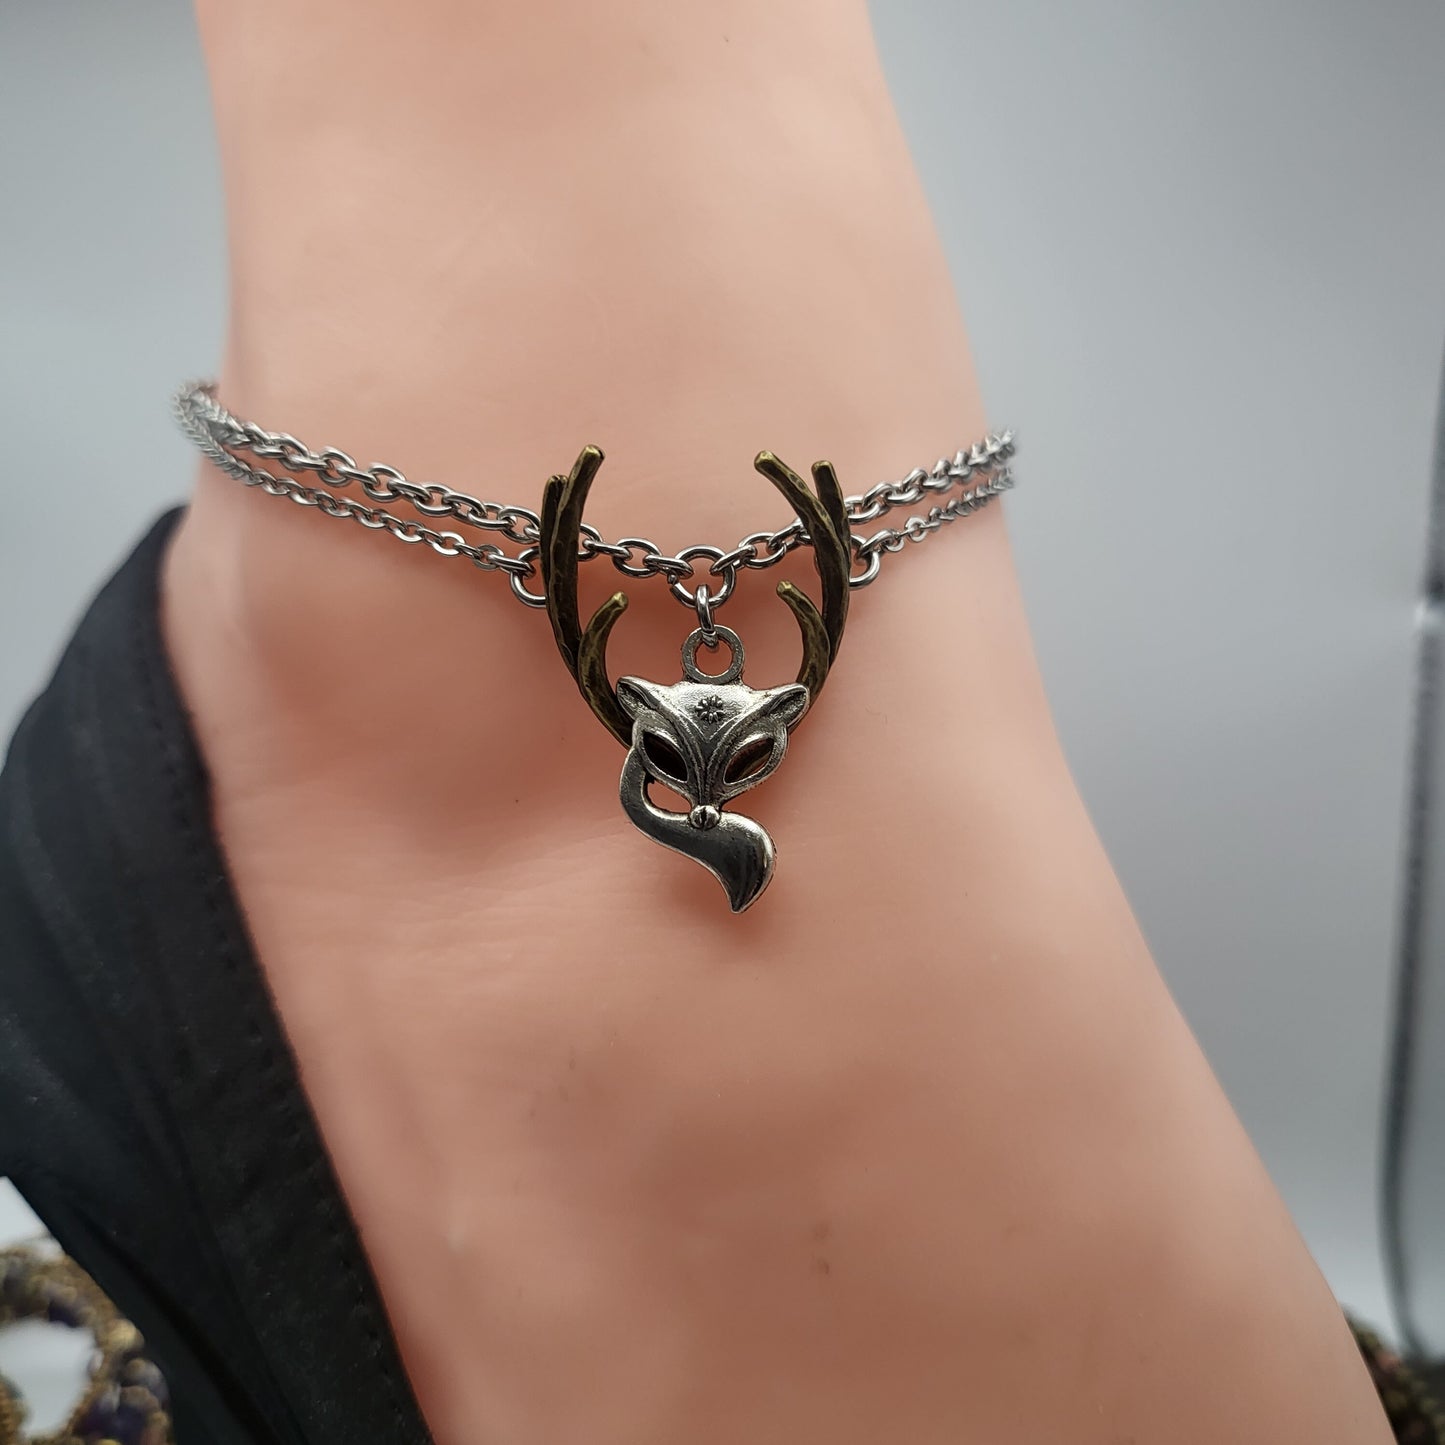 Vixen And Stag Anklet, Vixen Anklet, Hotwife Anklet, Lifestyle Anklet, Hotwife Jewelry, Swinger lifestyle, Hotwife Lifestyle, VixenAndStag